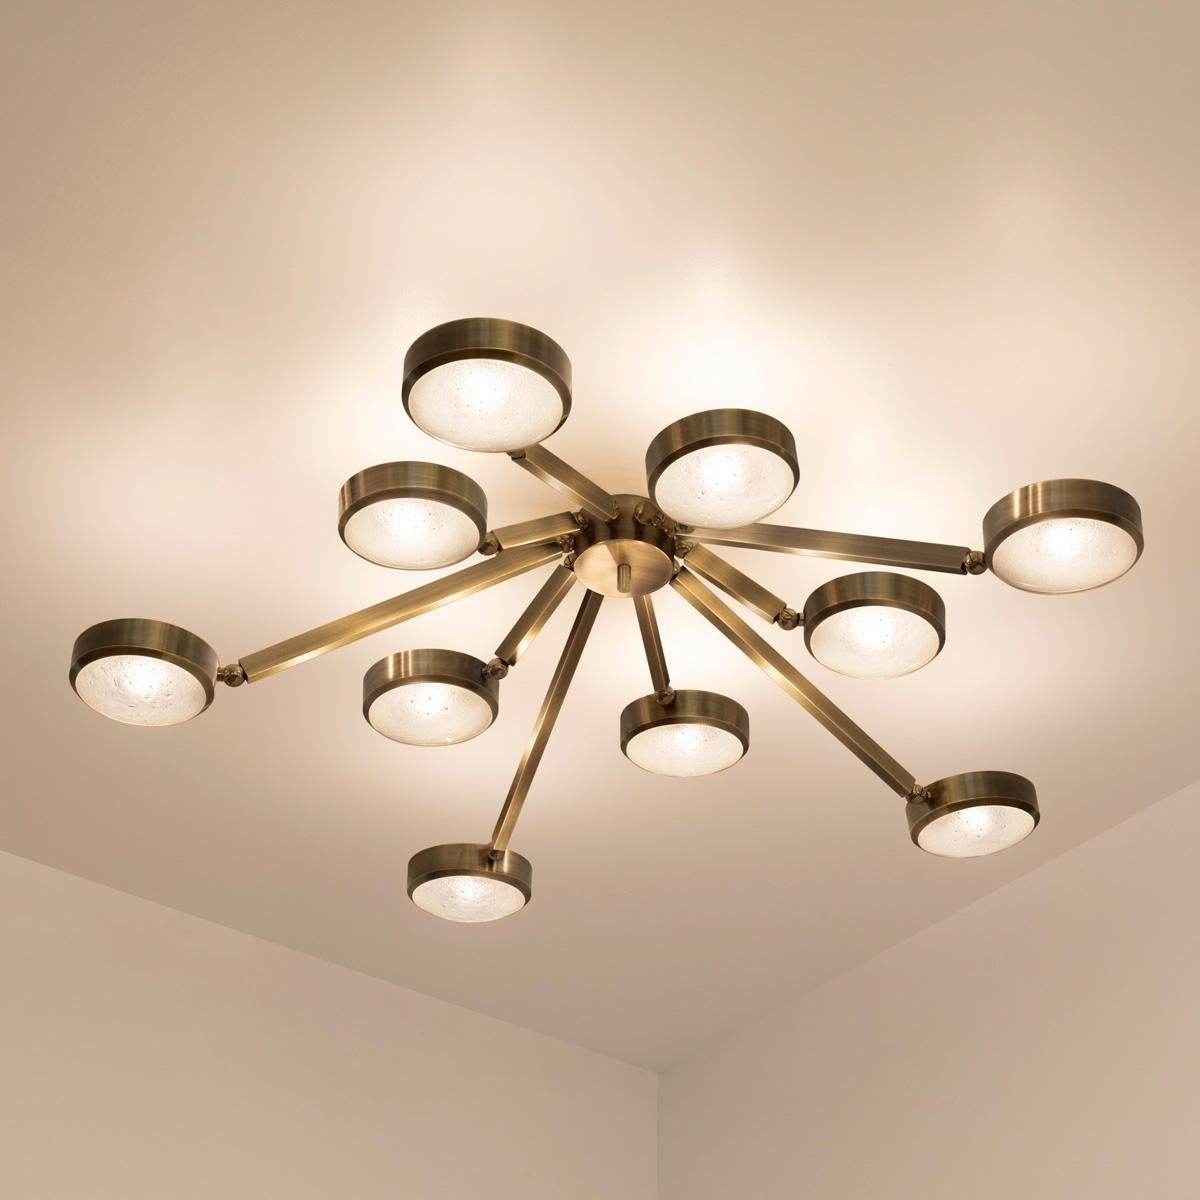 The Oculus ceiling light features an innovative articulating design that allows the ten arms to have a wide range of motion for endless configurations. The brass constructed frame can be flush mounted or installed on a stem.
The first images show